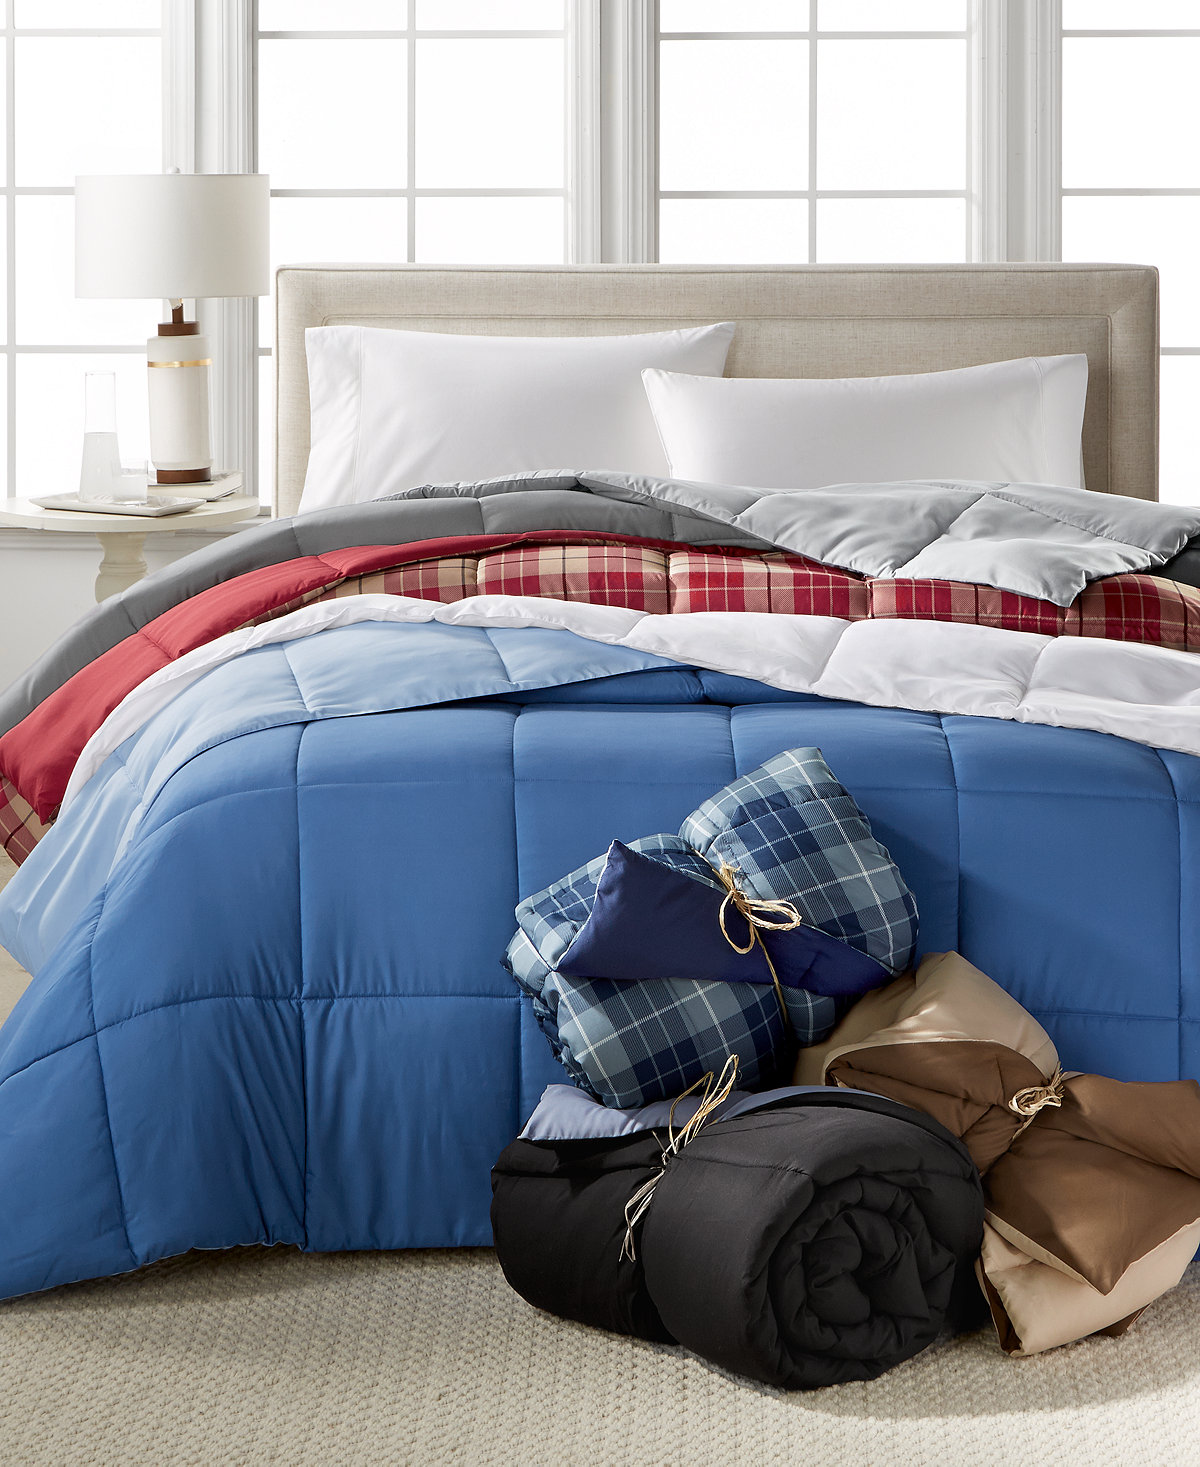 Today only: Down Alternative color comforters for $19 at Macy’s